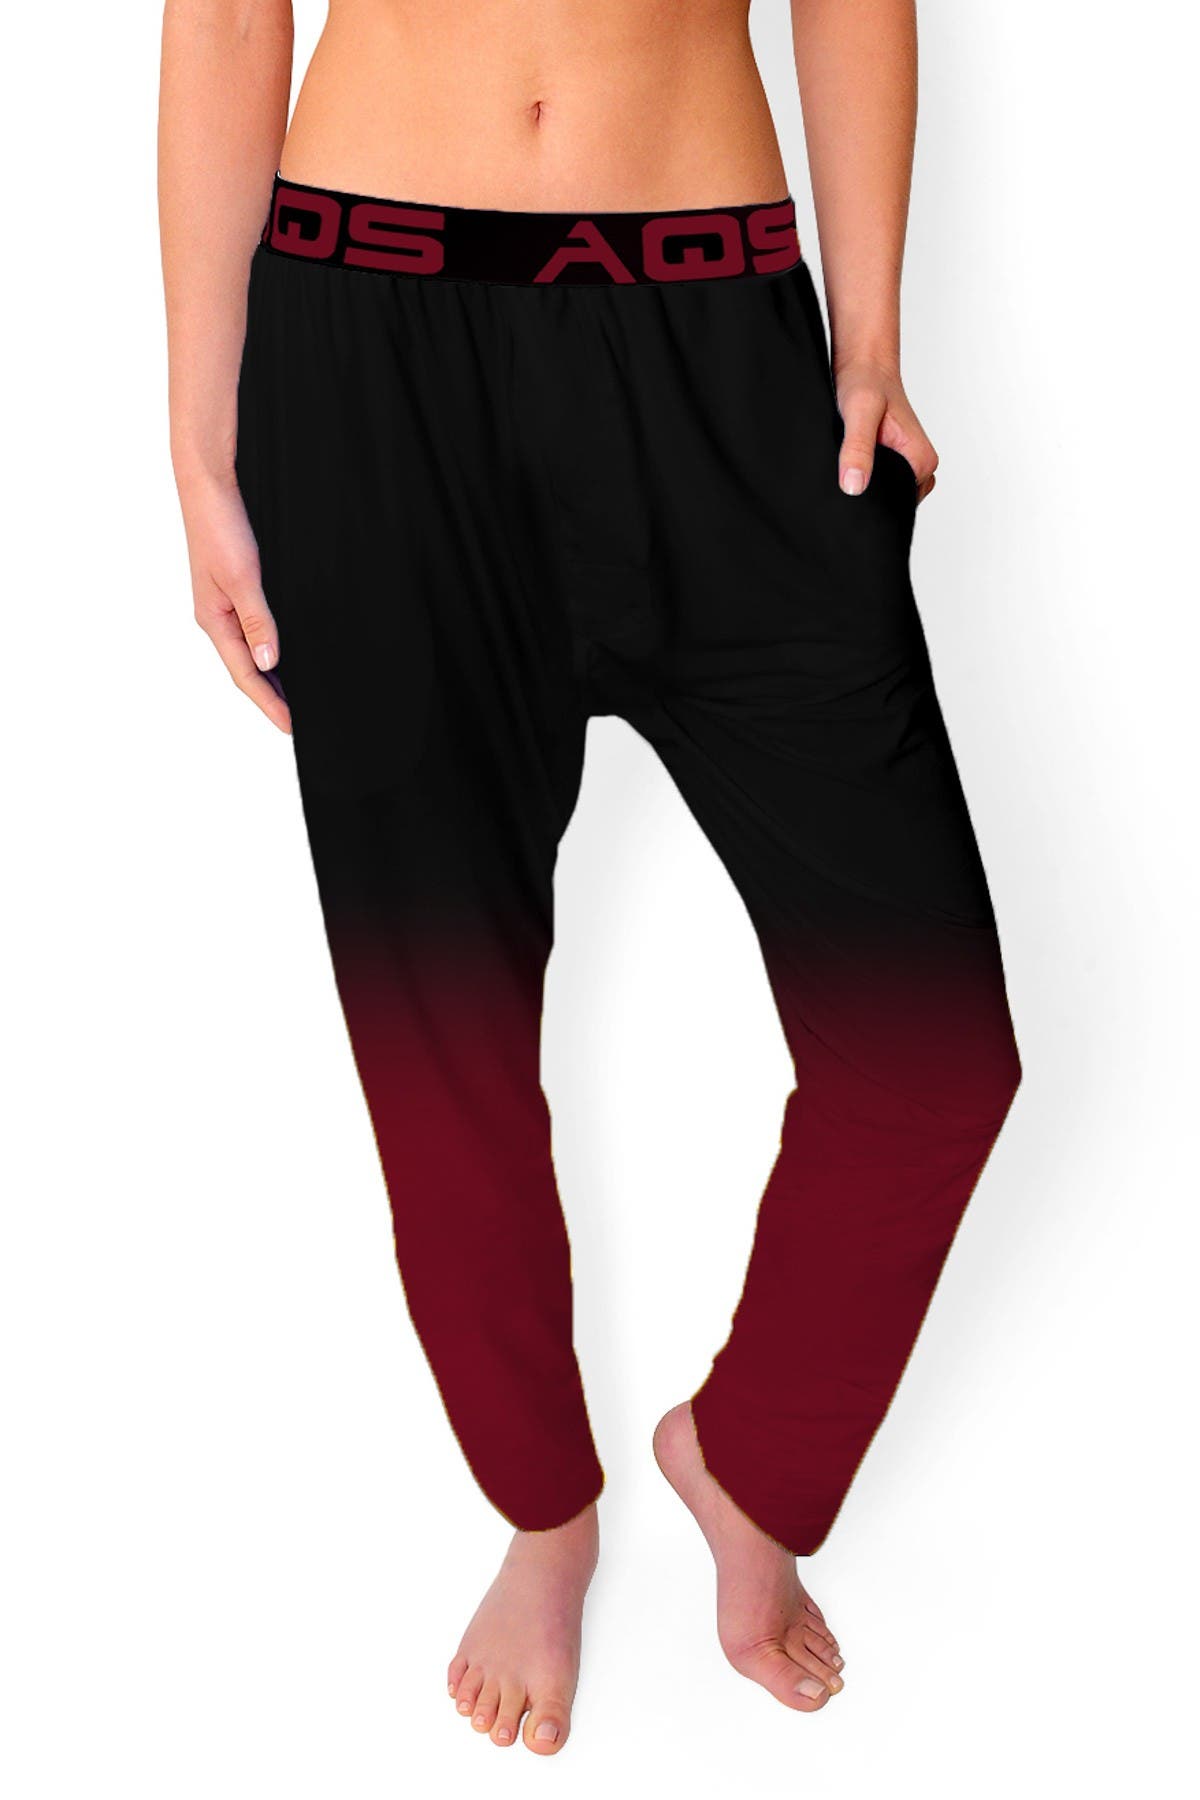 Aqs Ombre Lounge Pants In Black/burgundy Ombre